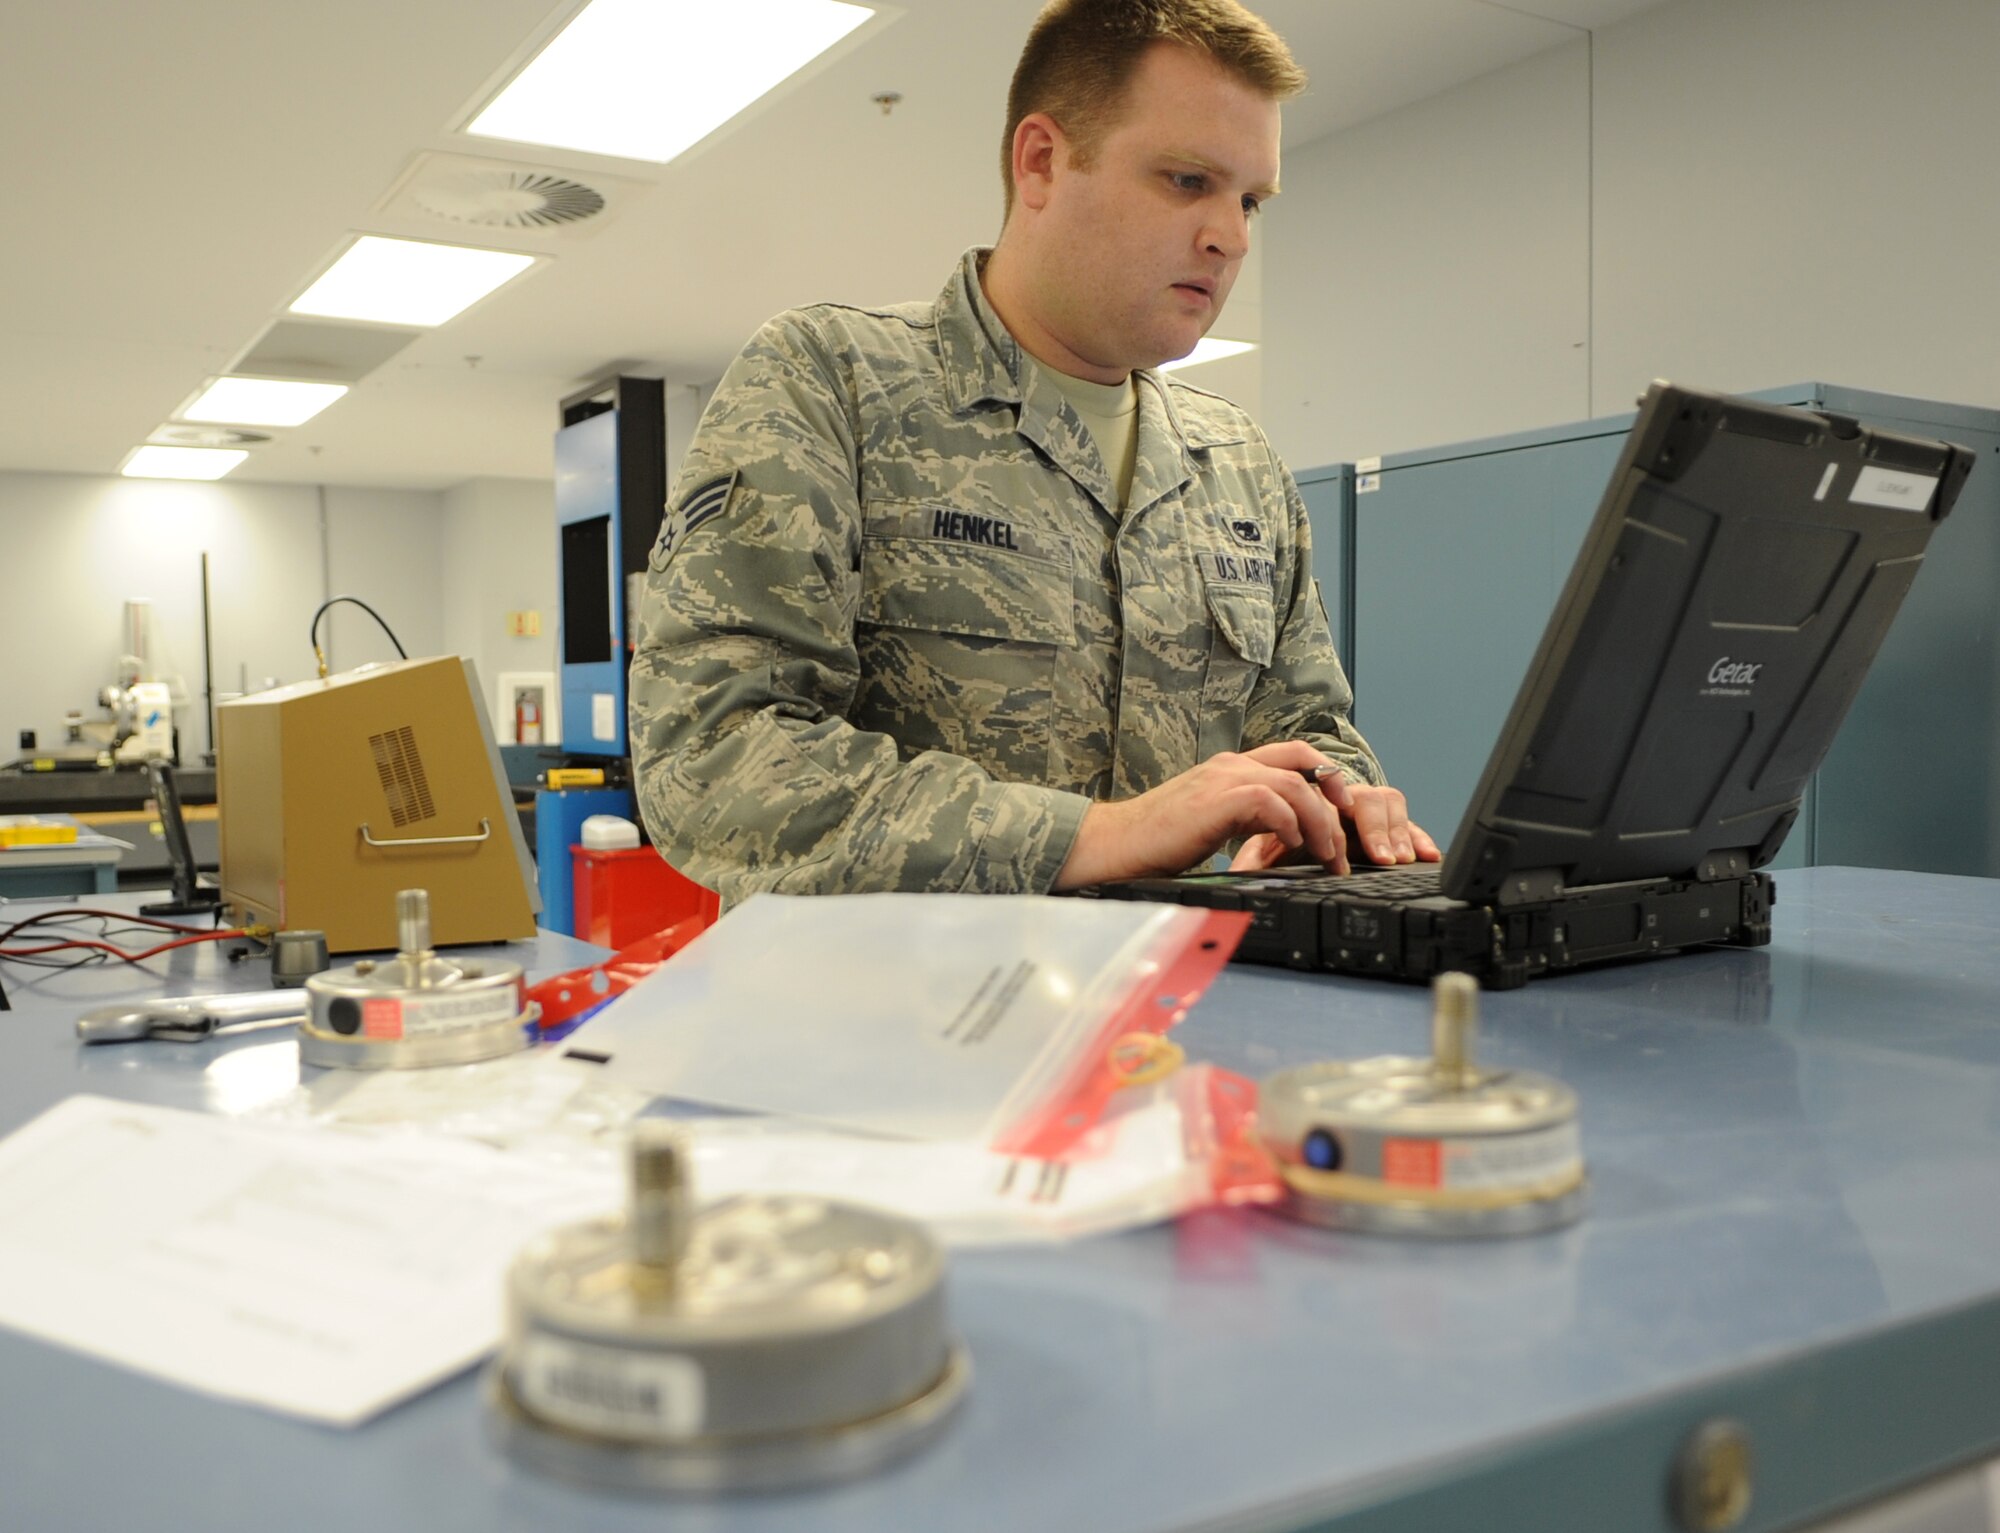 Senior Airman Phillip Henkel, a 19th Component Maintenance Squadron Precision Measurement Equipment Laboratory technician, checks the data from a vacuum gauge for a hydraulic system Aug. 8, 2013, at Little Rock Air Force Base, Ark. PMEL specializes in the calibration of many types of devices and equipment to help keep the base mission-ready. (U.S. Air Force photo by Staff Sgt. Caleb Pierce)